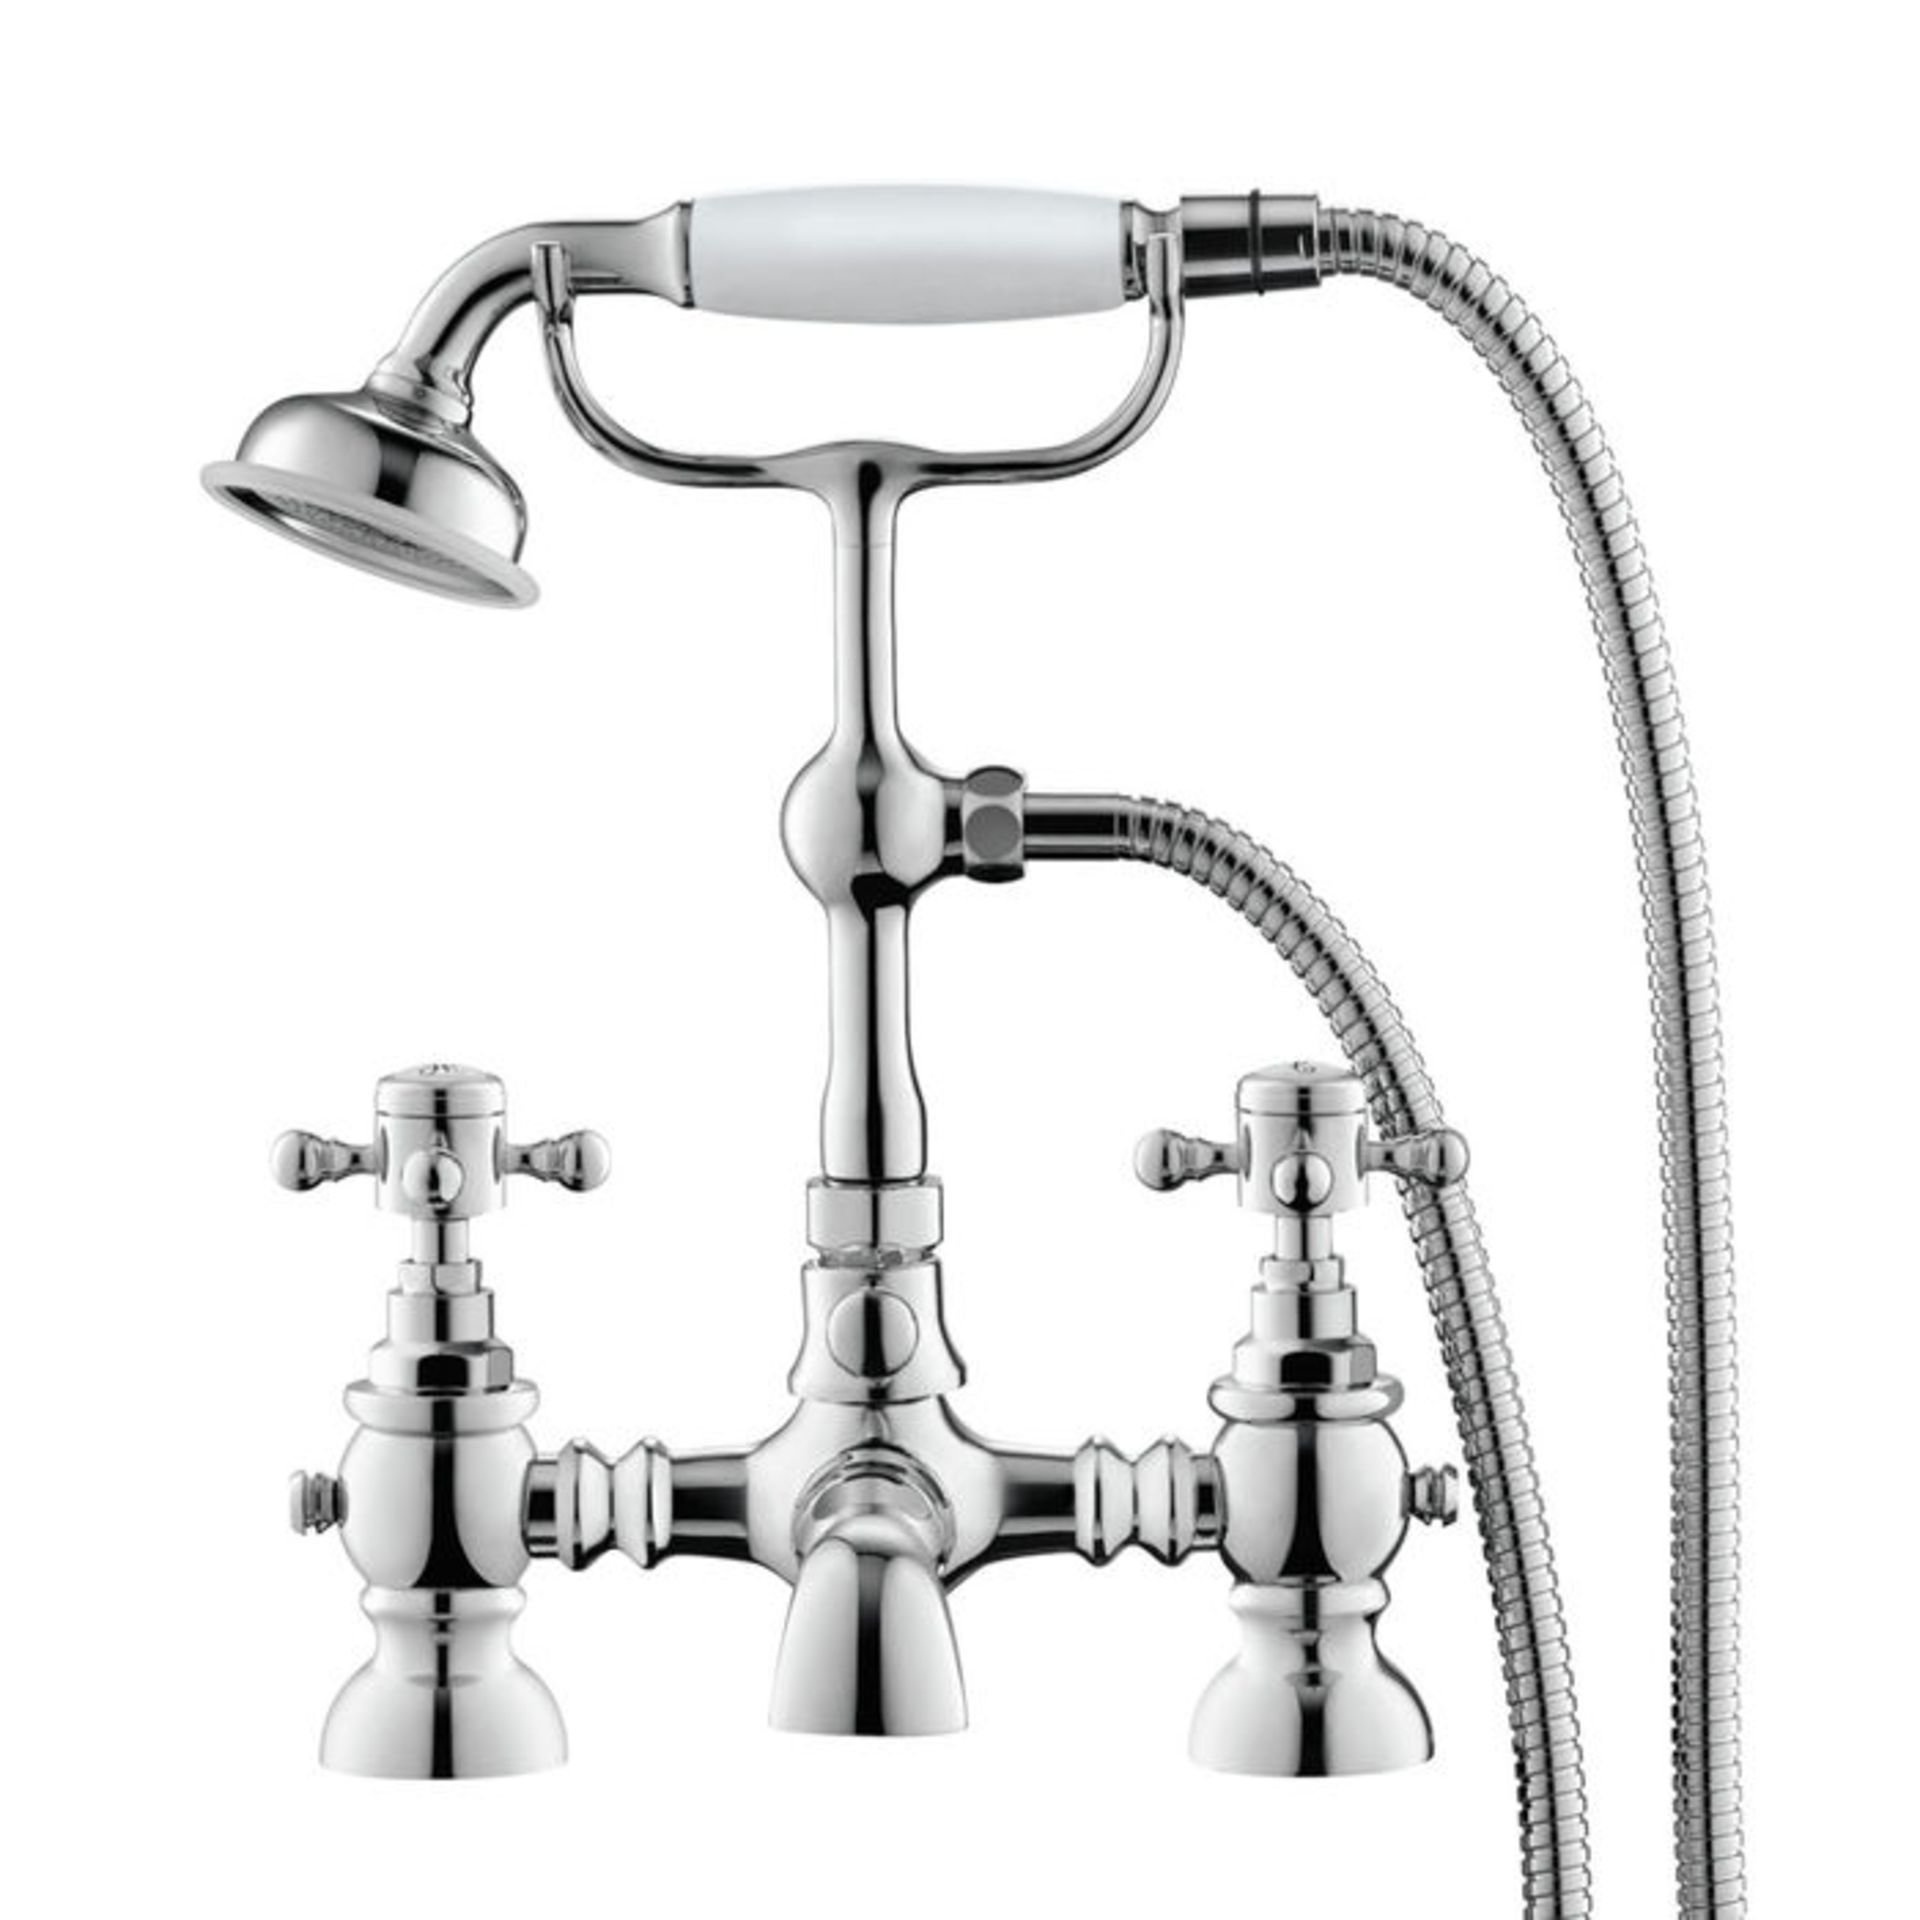 (R1001) Cambridge Bath Shower Mixer - Traditional Tap with Handheld Shower We love this because it - Image 3 of 3